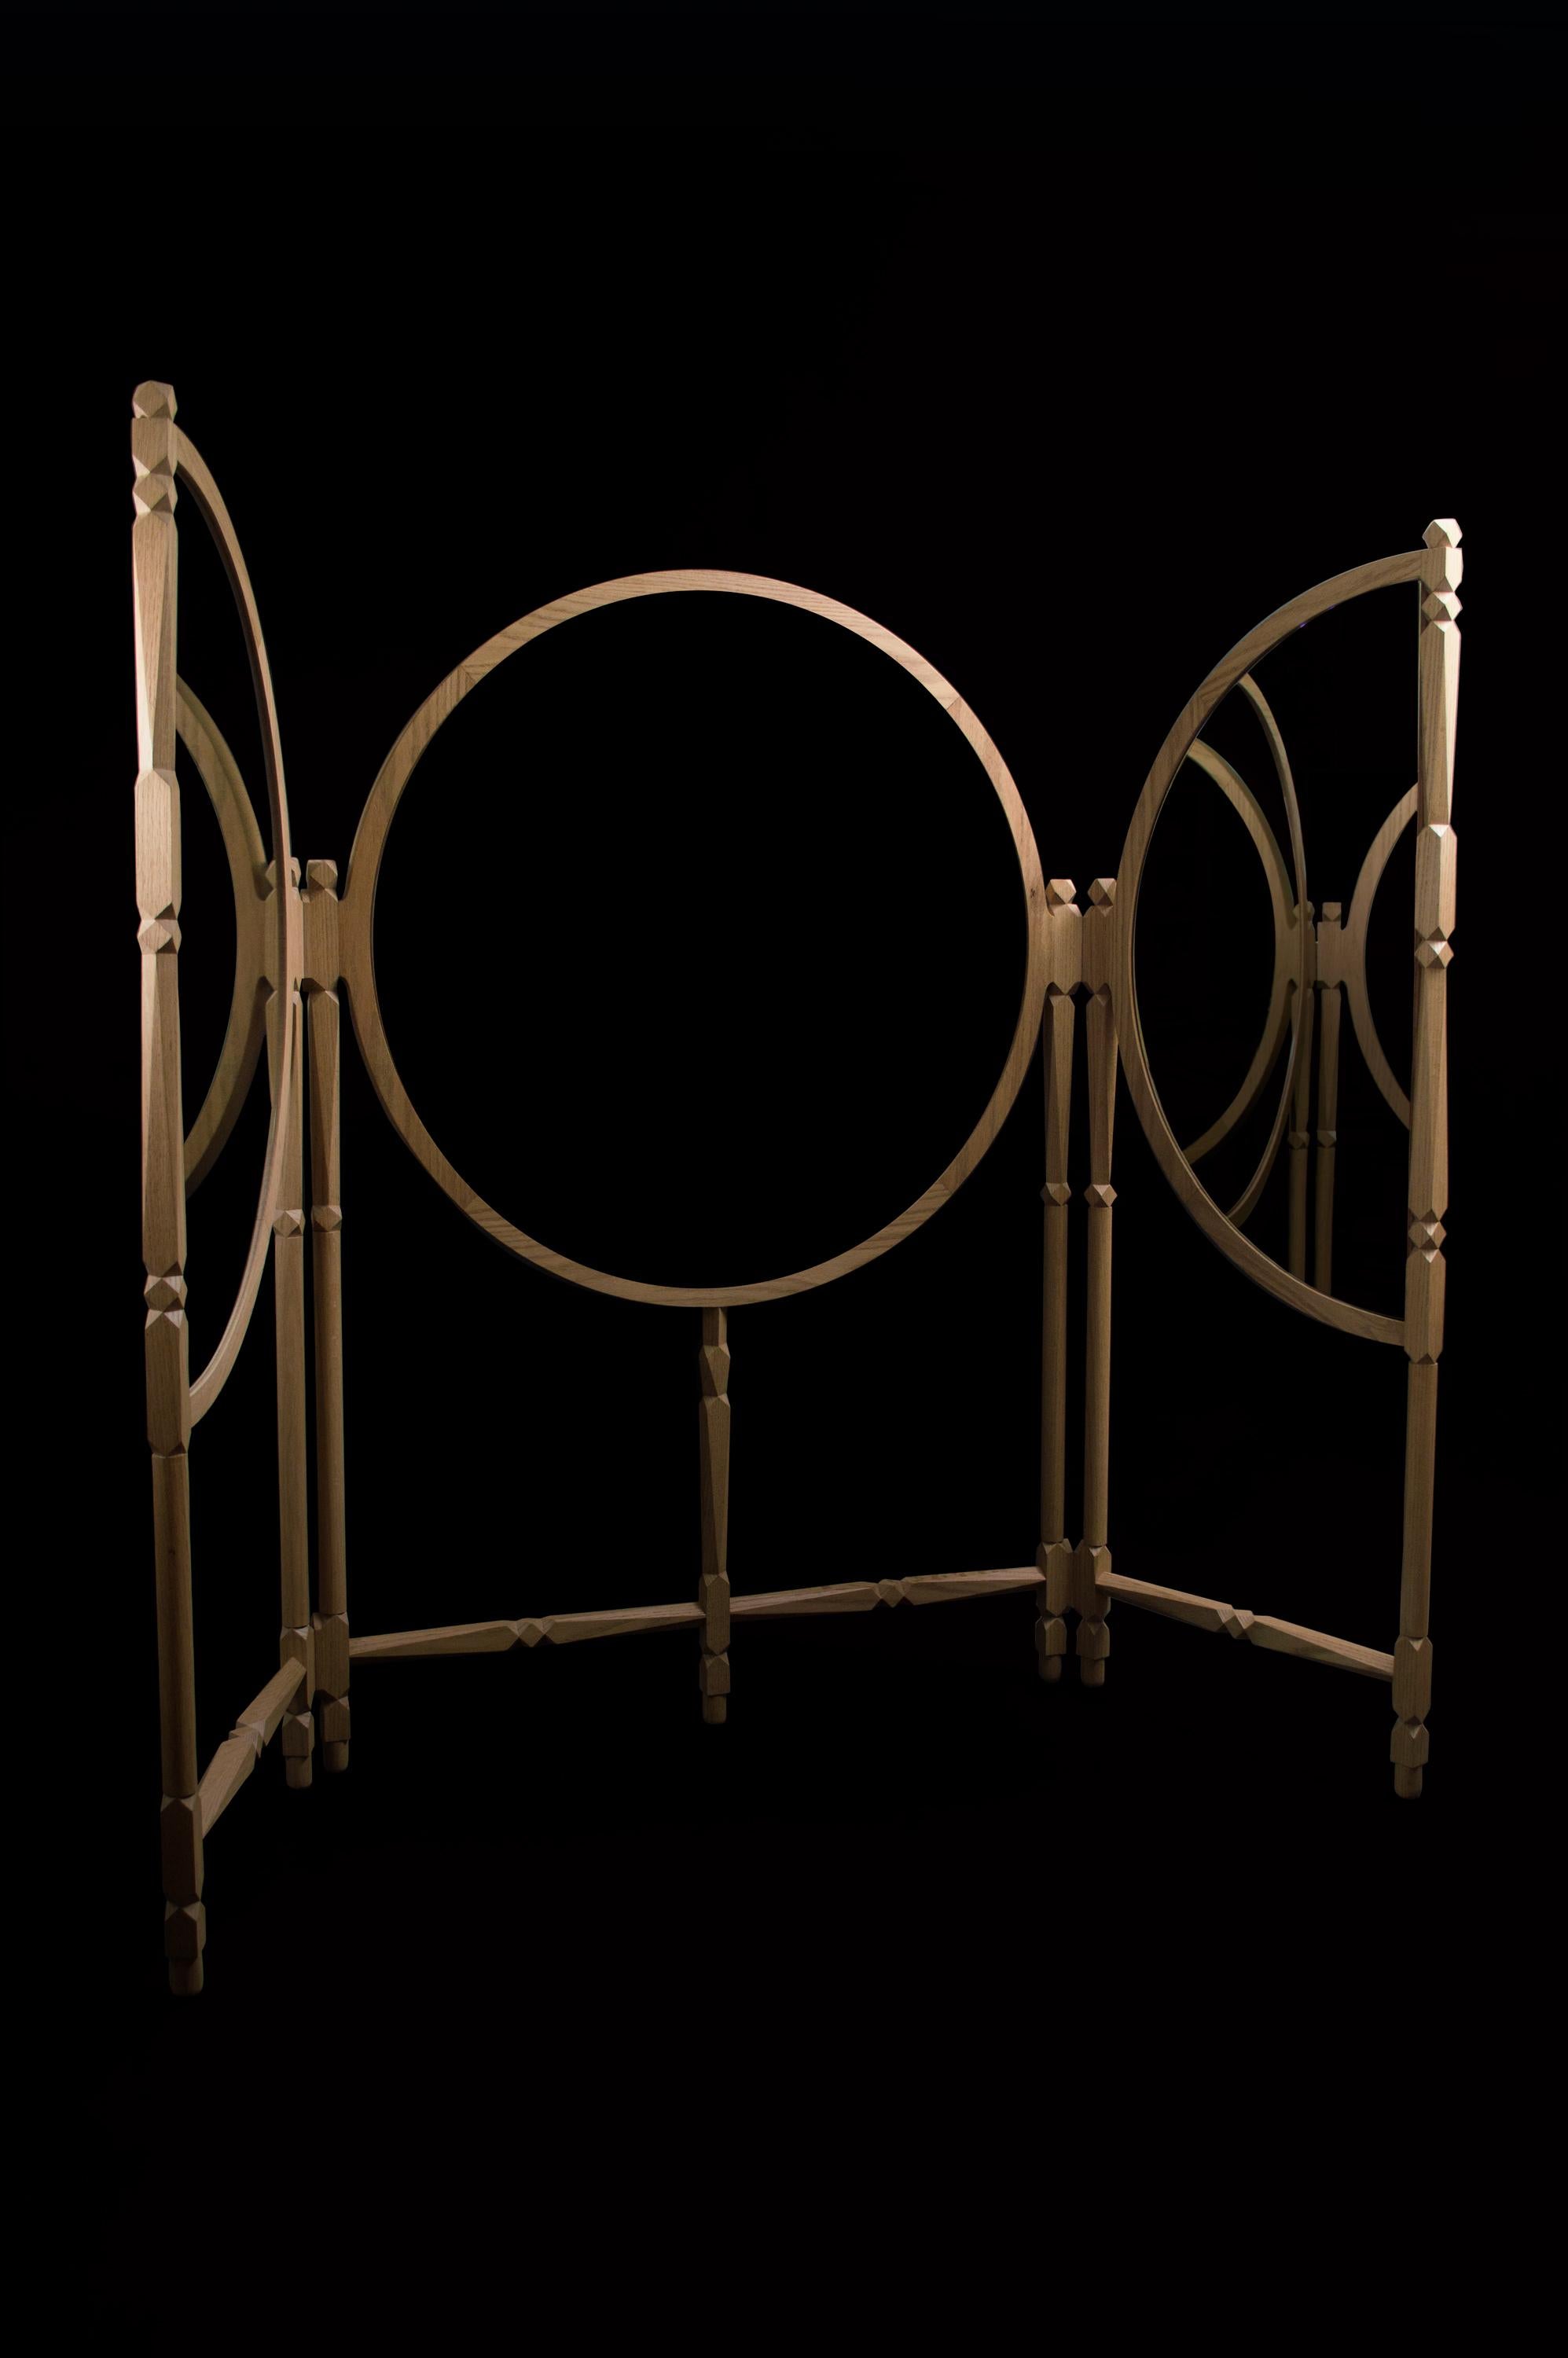 BIOMBO Triptych by Acoocooro
Dimensions: W219 x D4 x H144 cm
Materials: solid oak wood floor mirror/divider; natural mirrors (front) and copper-smoked glass mirros (back); brass decorative accents.

A generous, flattering, and intimate piece,